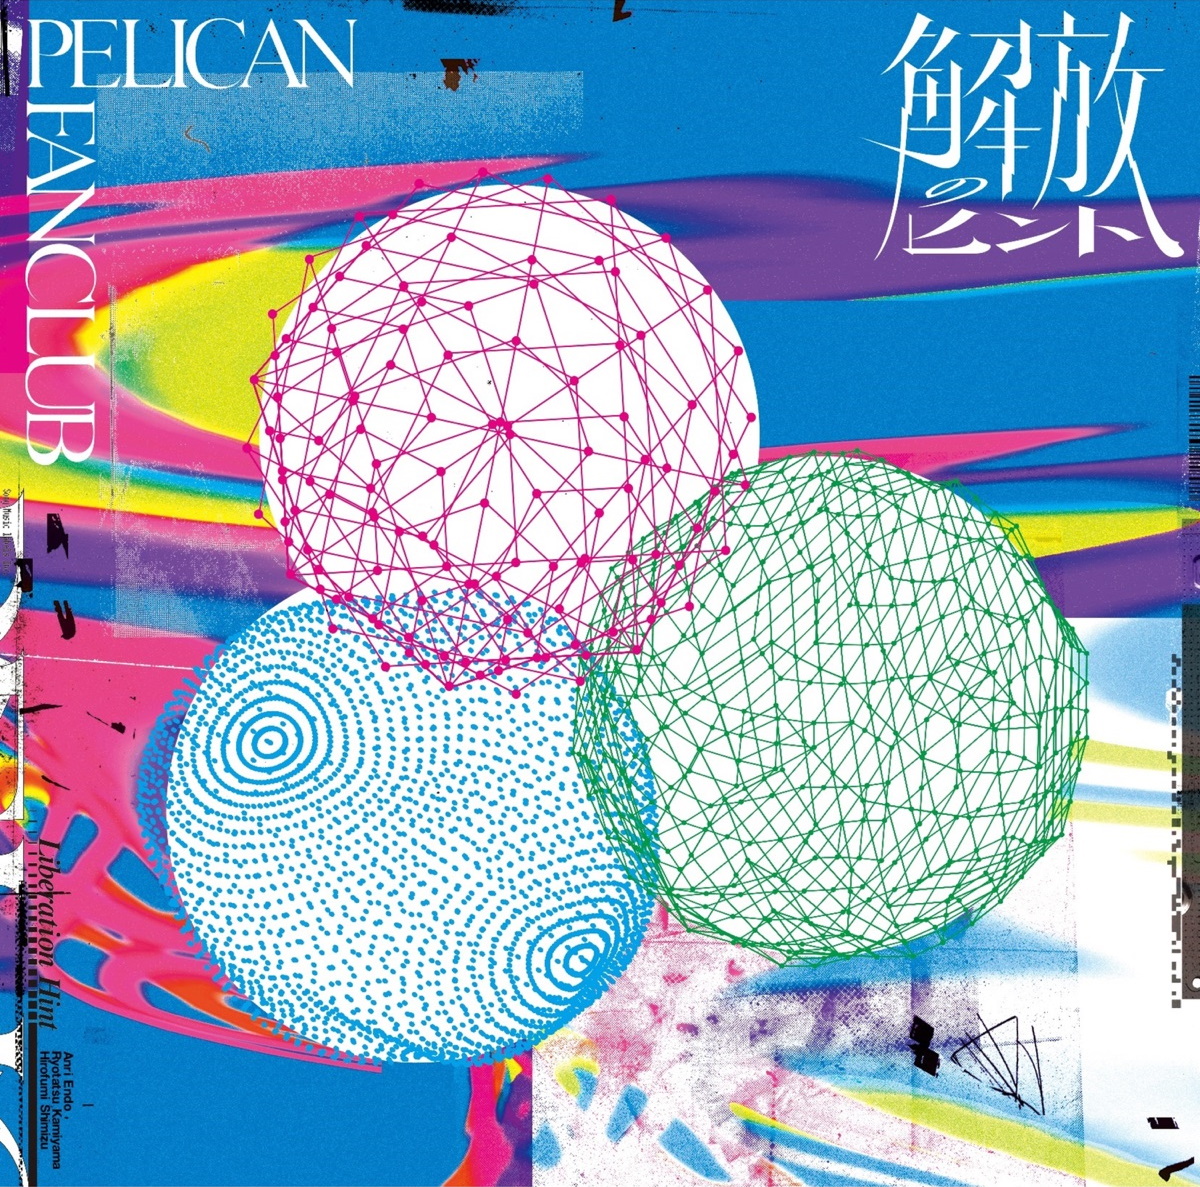 Cover art for『PELICAN FANCLUB - 俳句』from the release『Kaihou no Hint